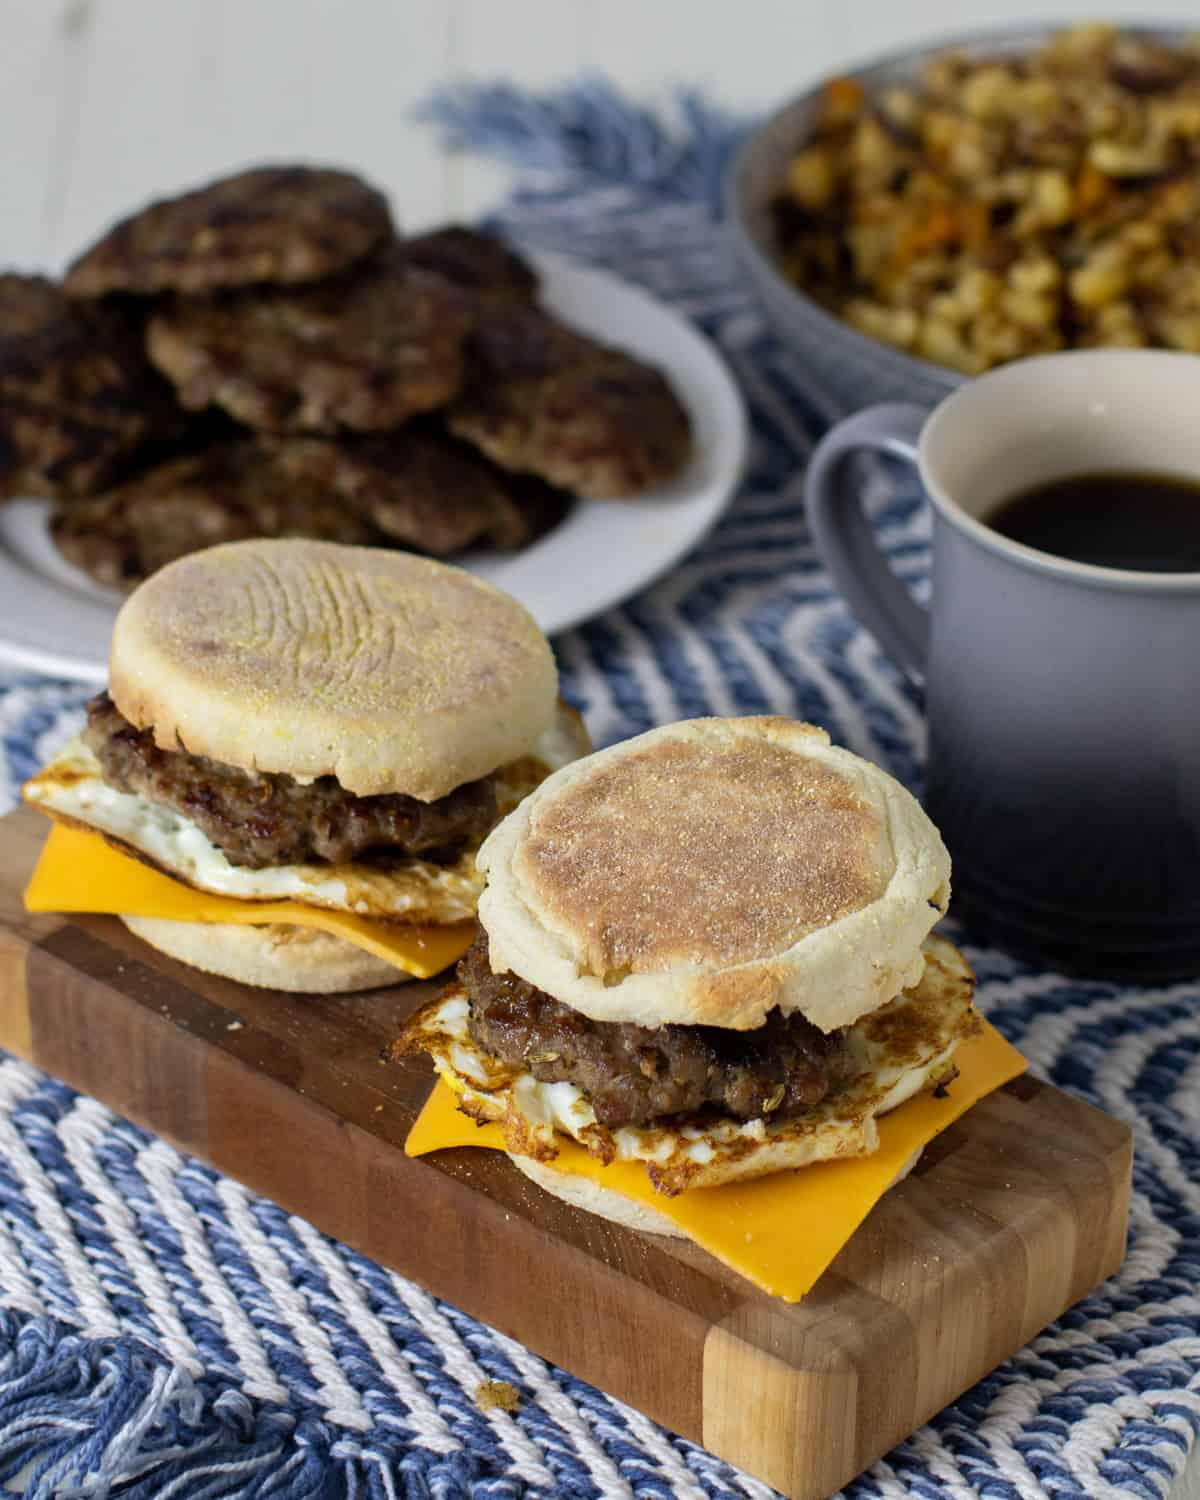 Sausage patties and fried egg in an English muffin.